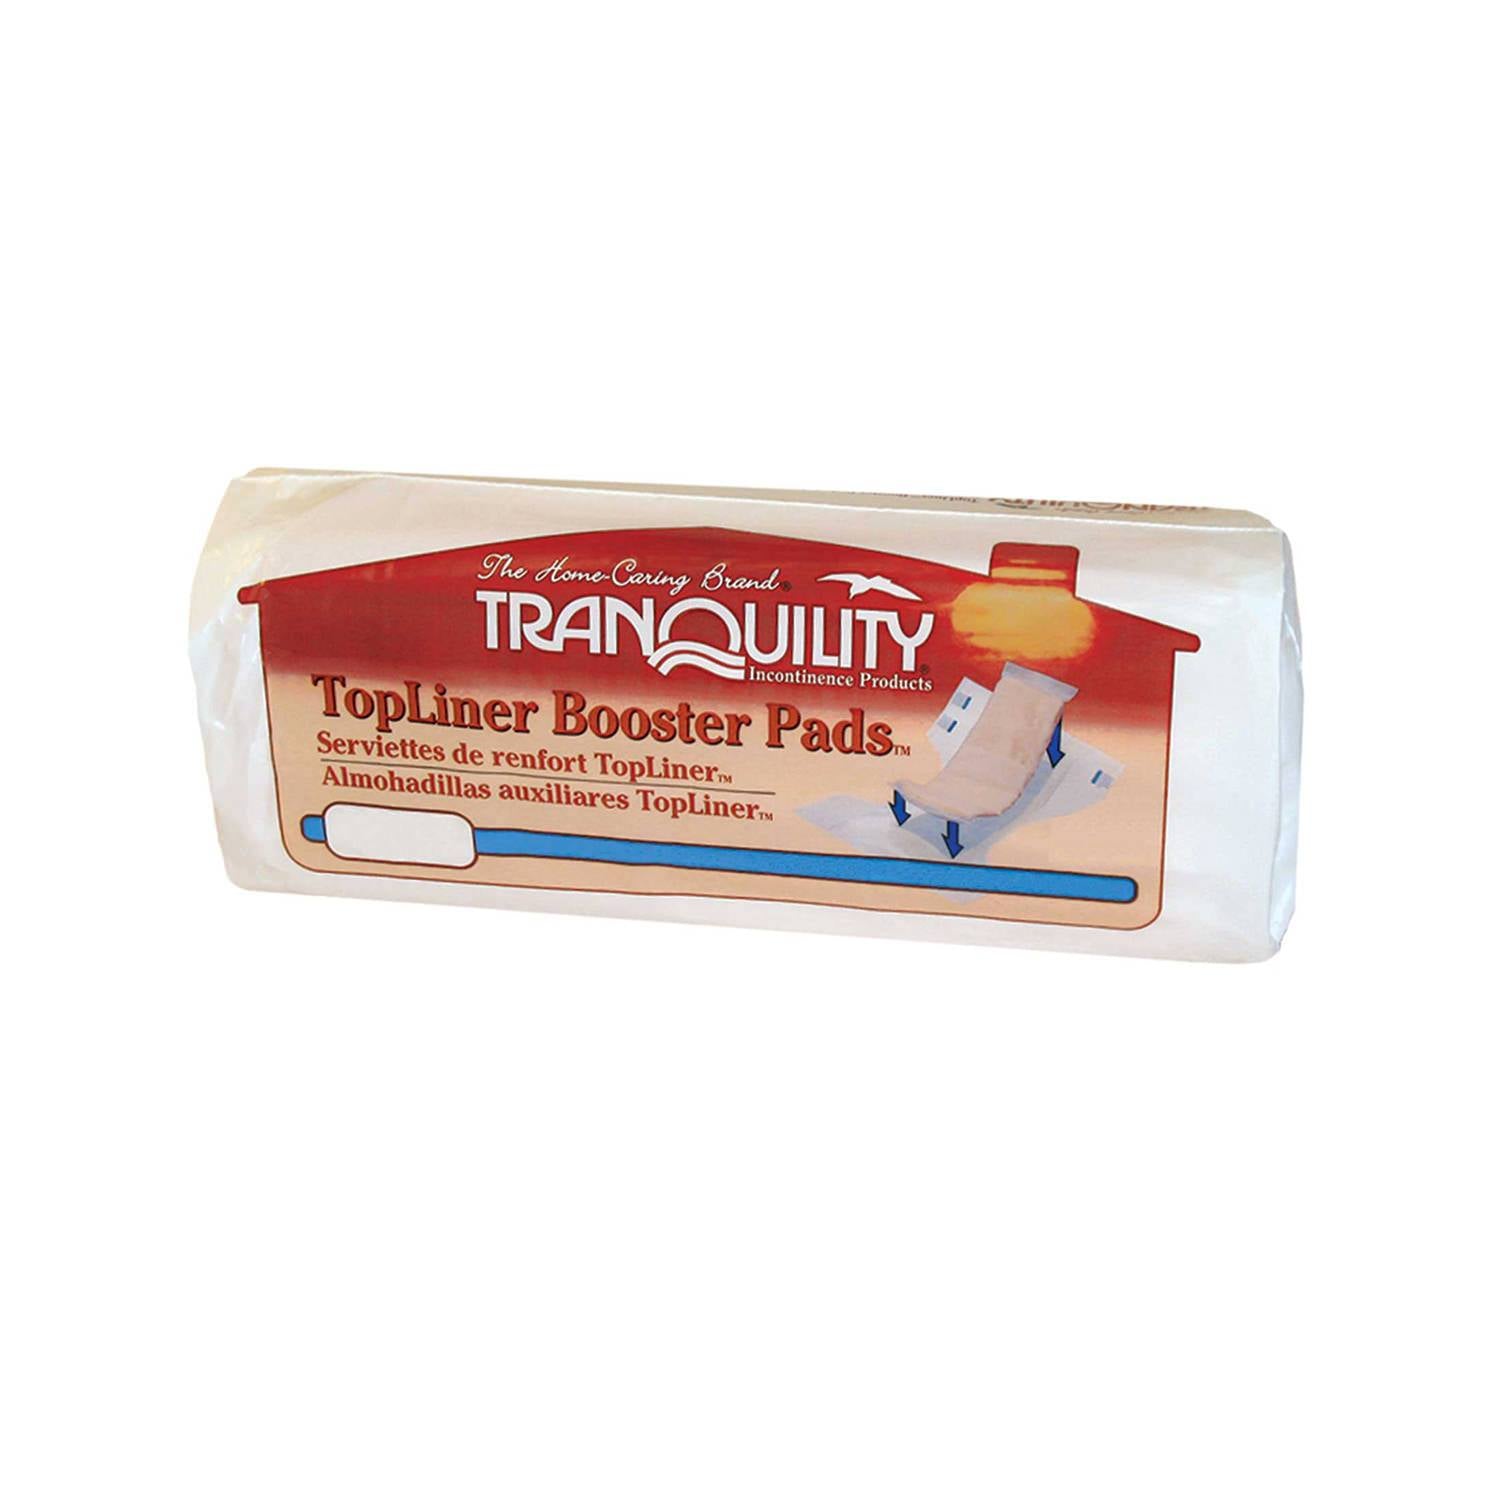 TRANQUILITY BOOSTER PAD